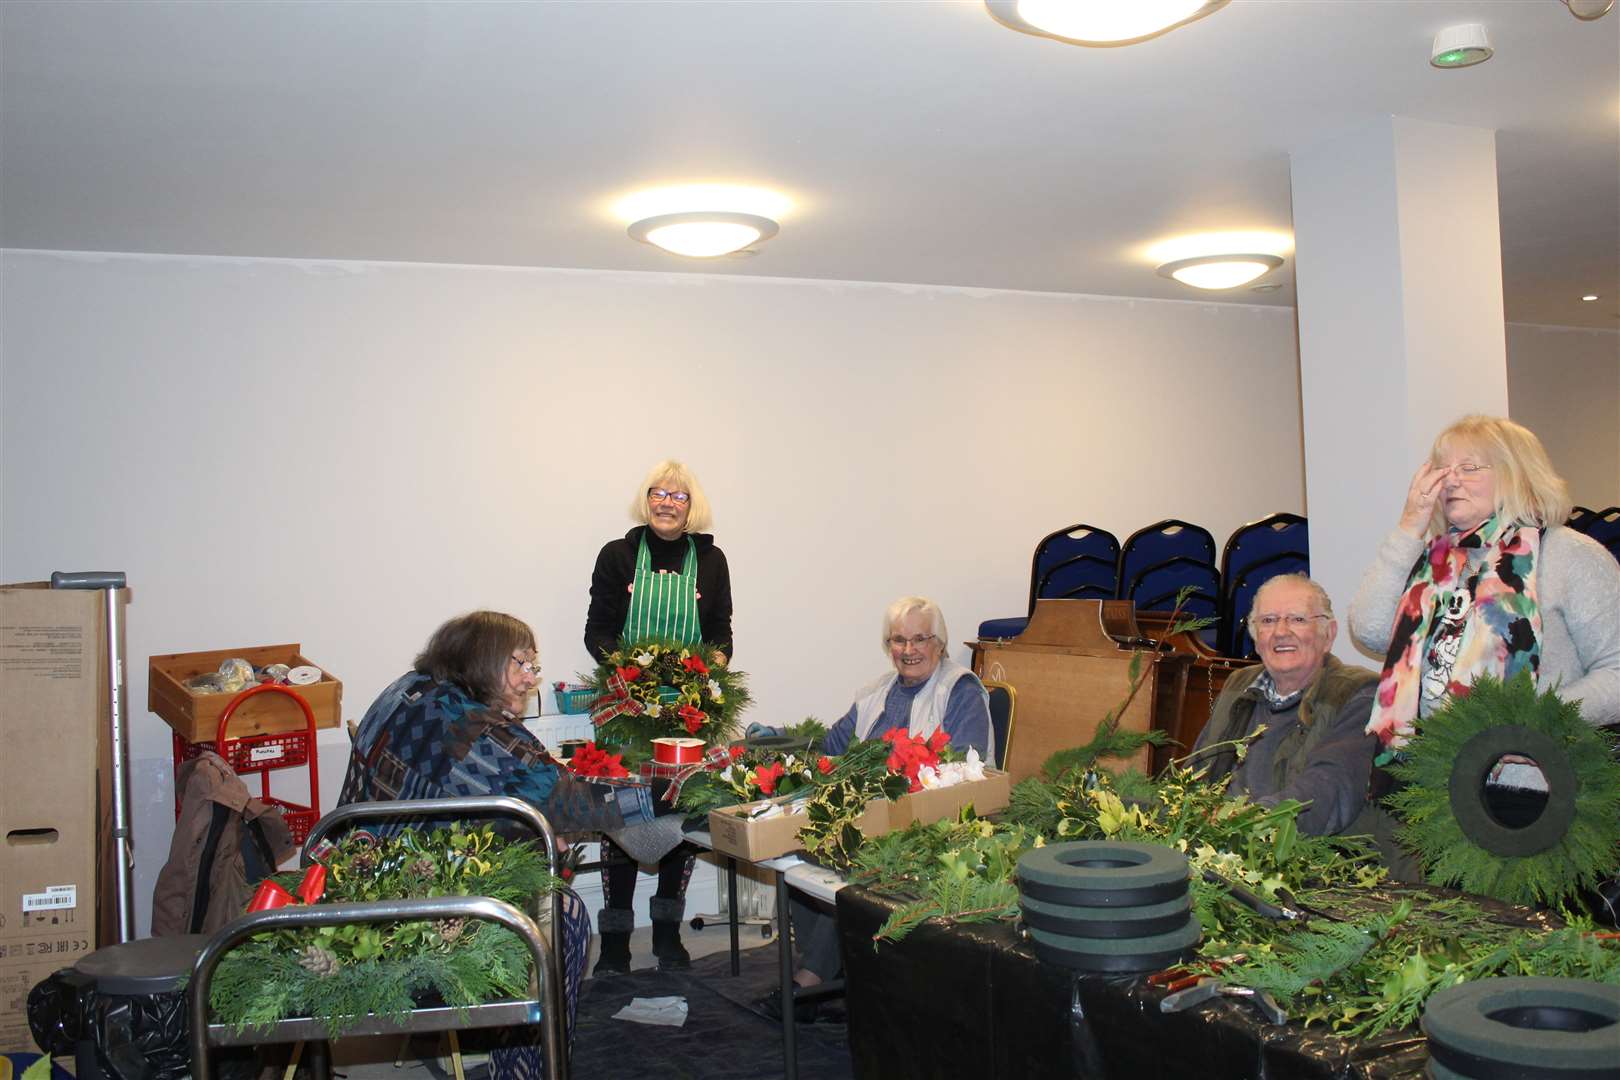 Una Cran, Jenni Cruickshank, Heather and Charlie Milne and Carol Robertson all busy with wreath-making at Garioch Heritage centre, Loco works road, Inverurie. Picture: Griselda McGregor